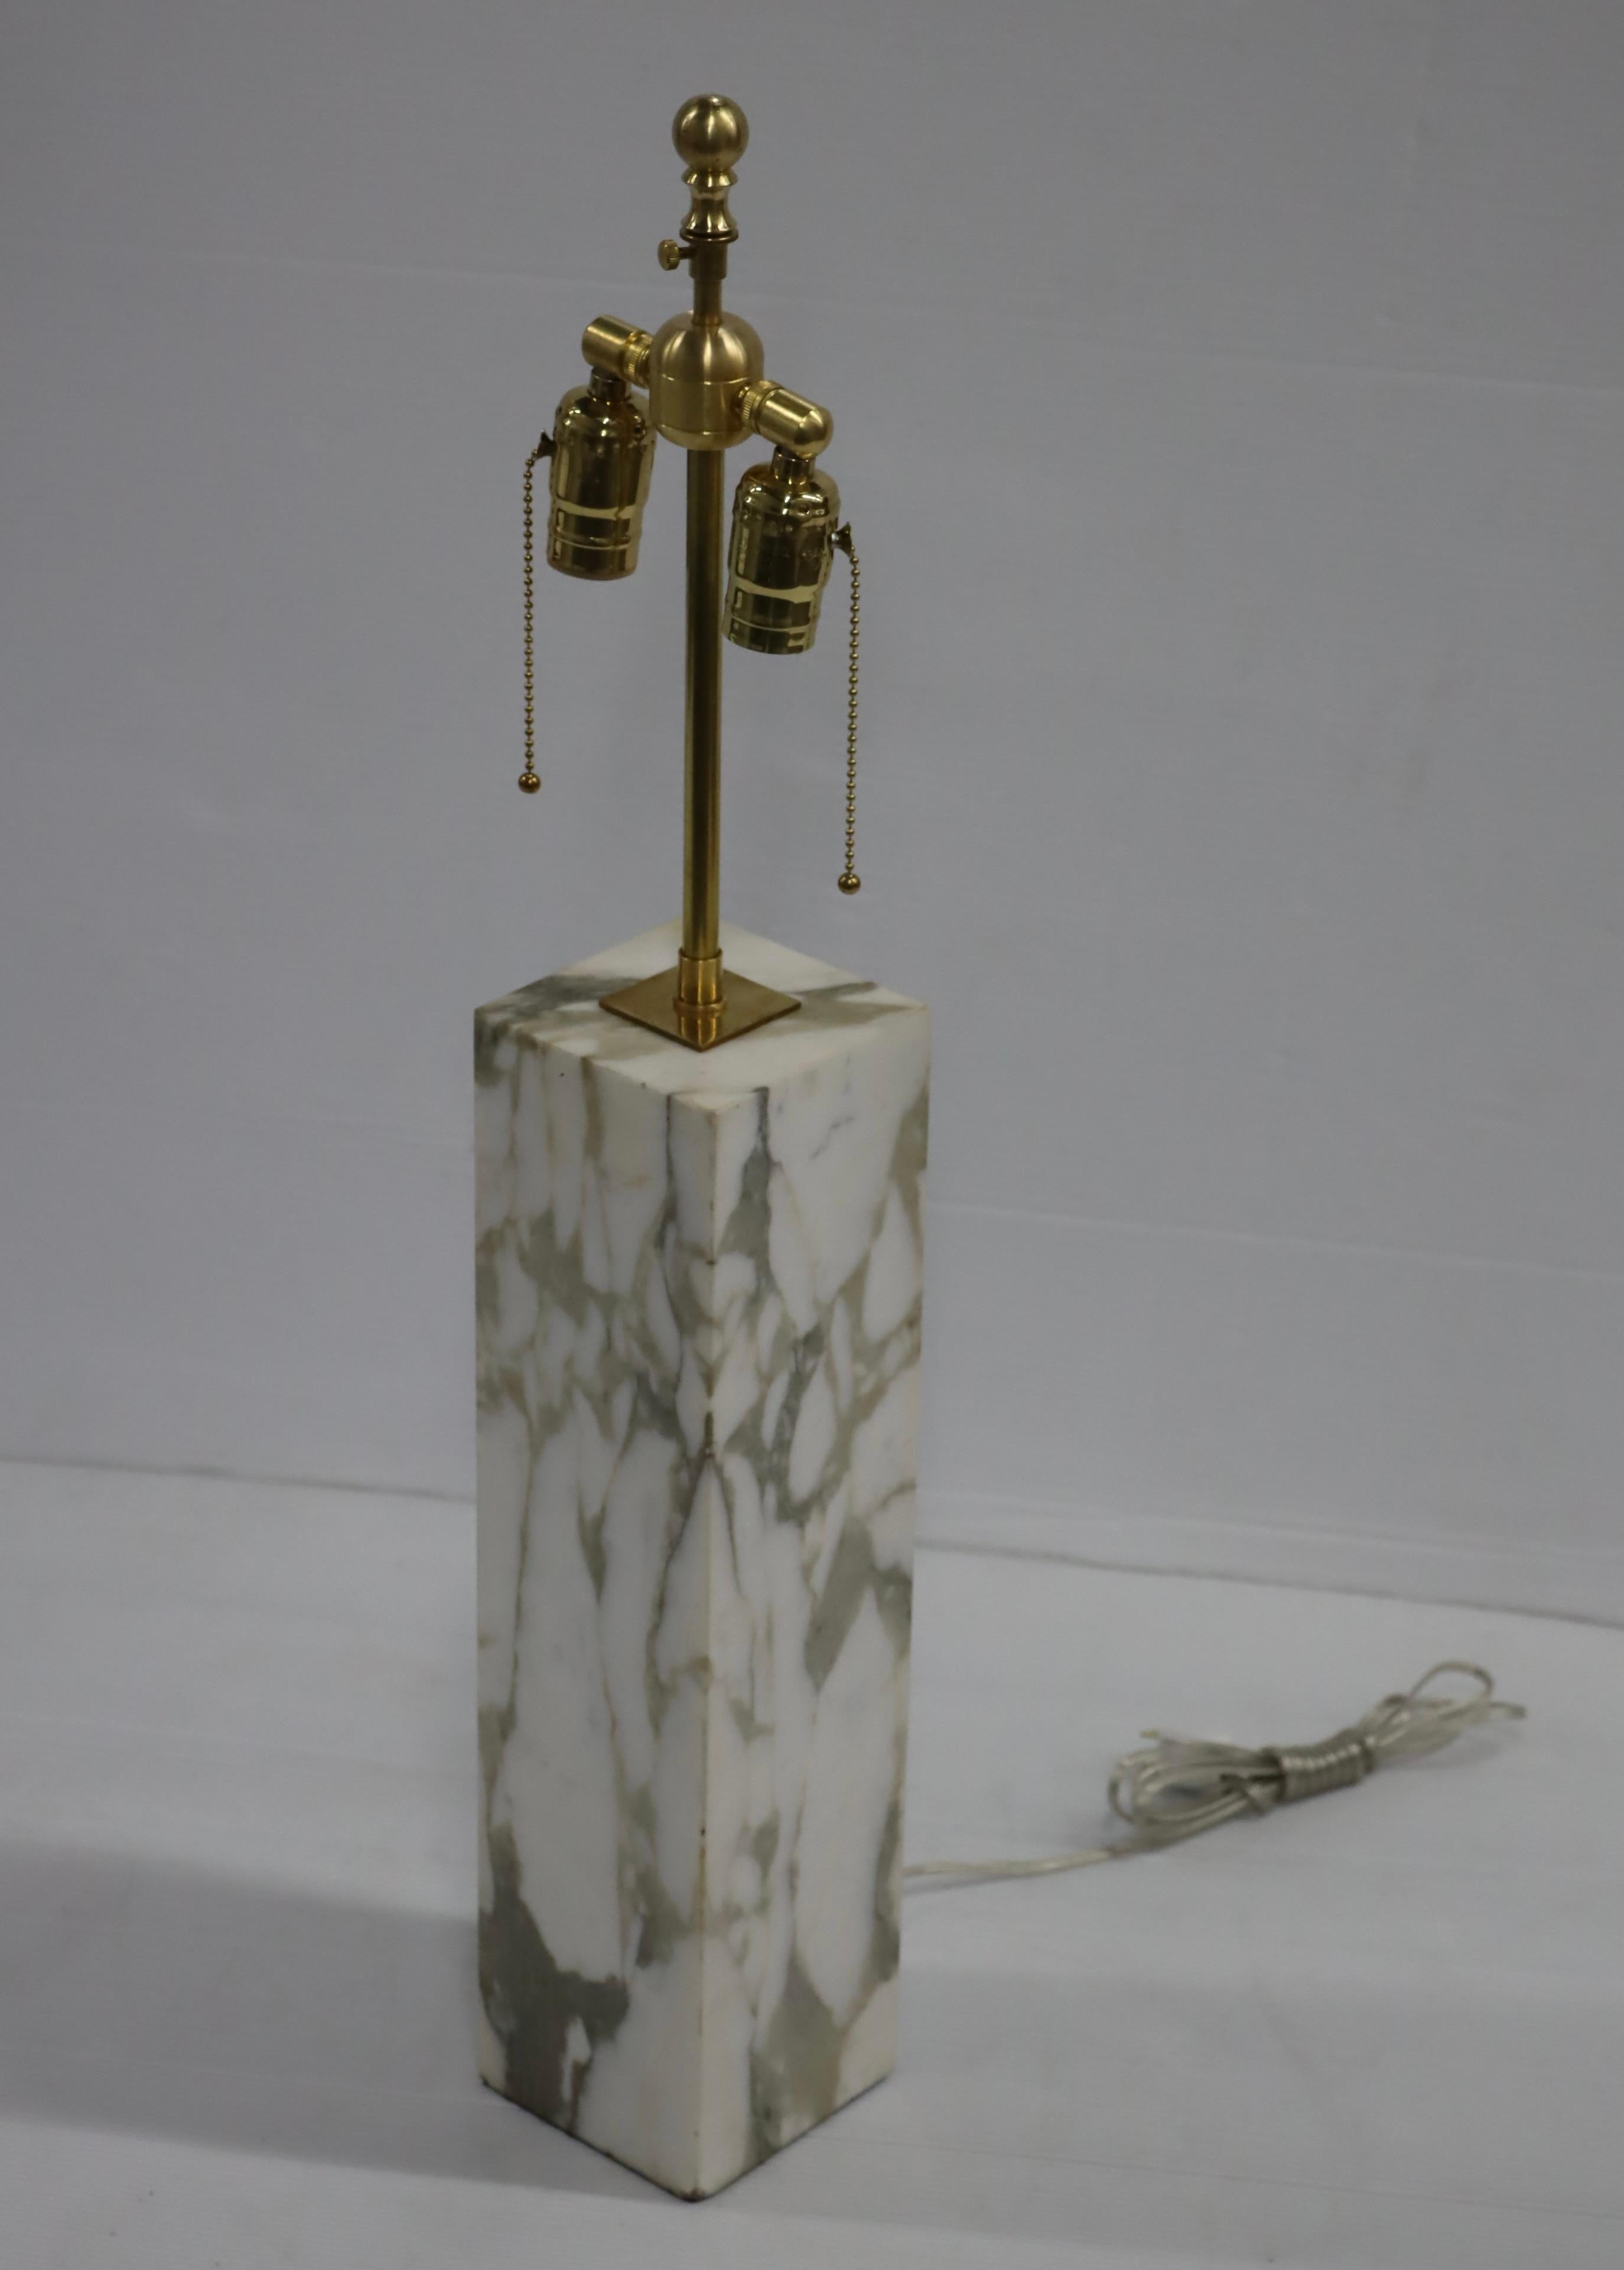 1960's Mid-Century Modern Carrara marble with brass hardware large table lamp designed by T.H. Robsjohn Gibbings, in vintage condition with some wear and patina due to age and use, there i some chips to the marble, newly professionally rewired and